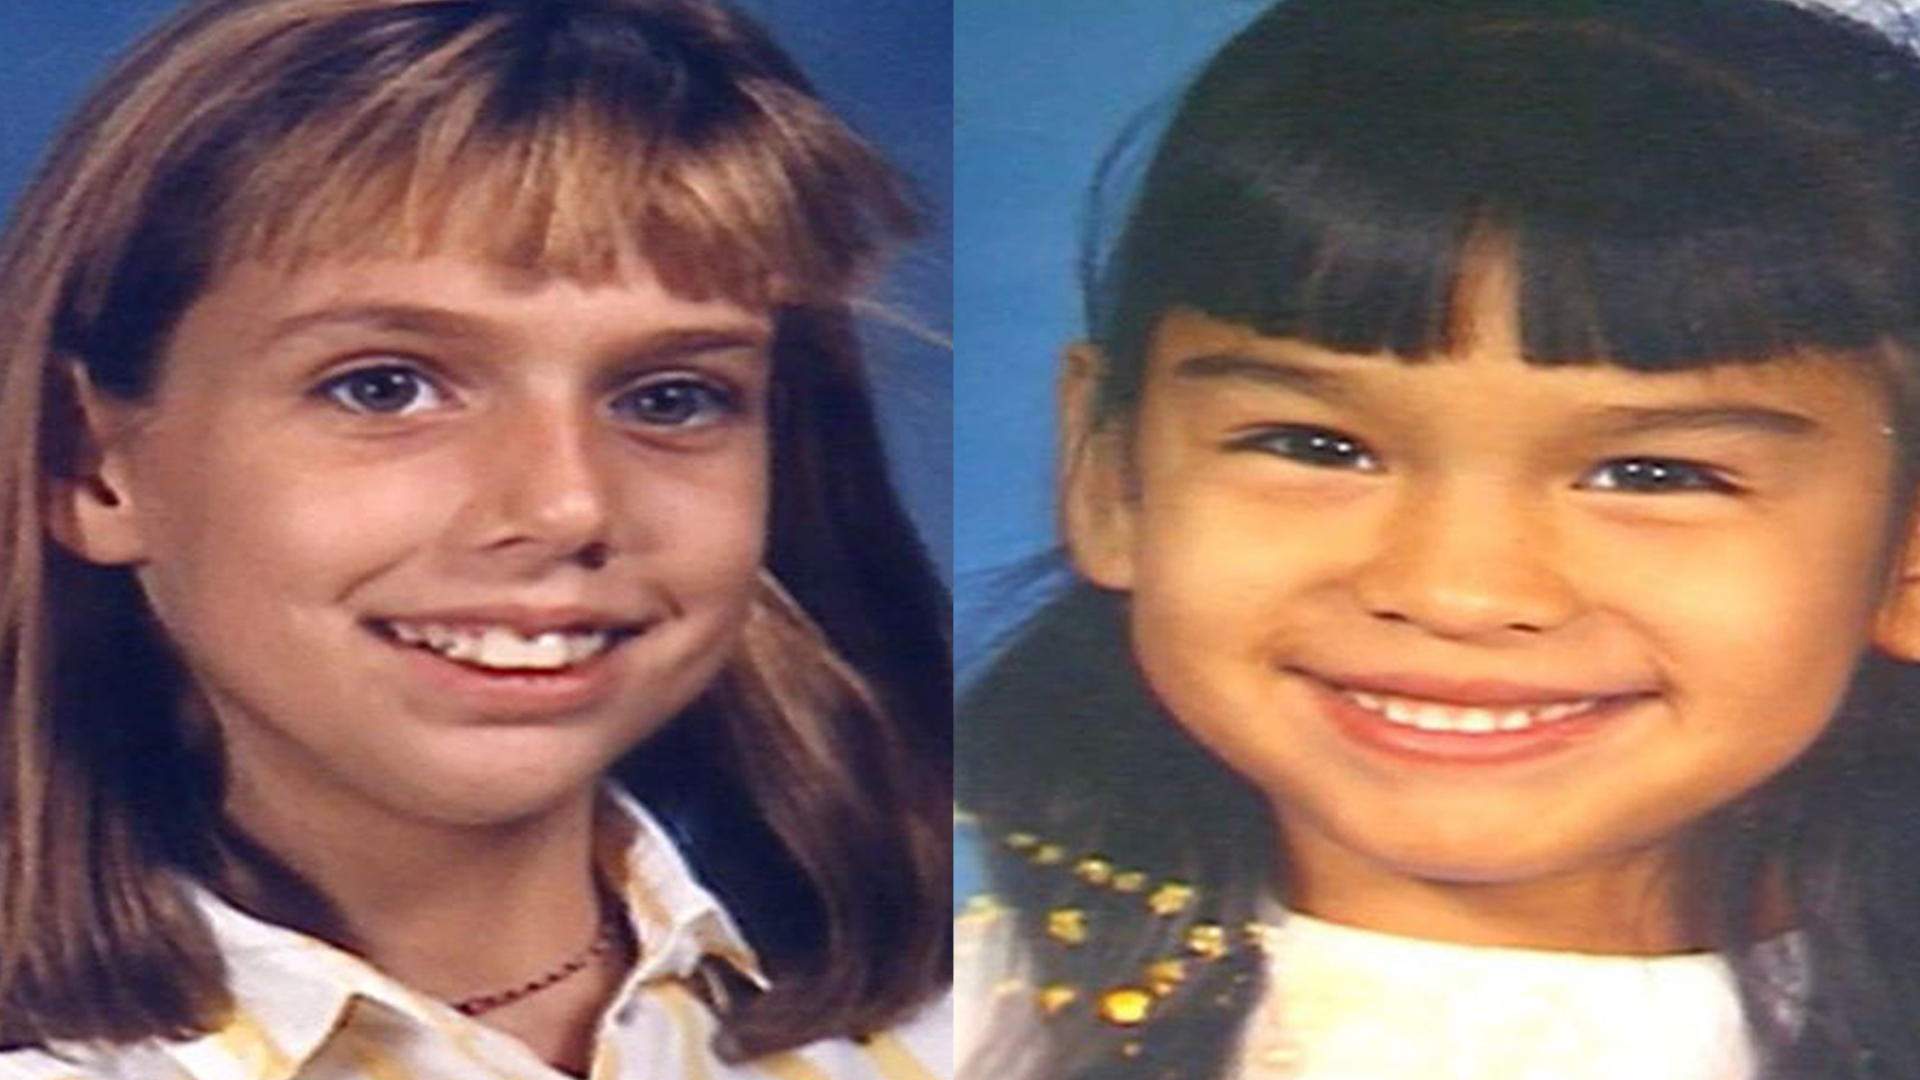 Thirty years ago this month, Heidi Seeman and Erica Botello disappeared from San Antonio; their bodies were found days apart. We revisit their cases and legacies